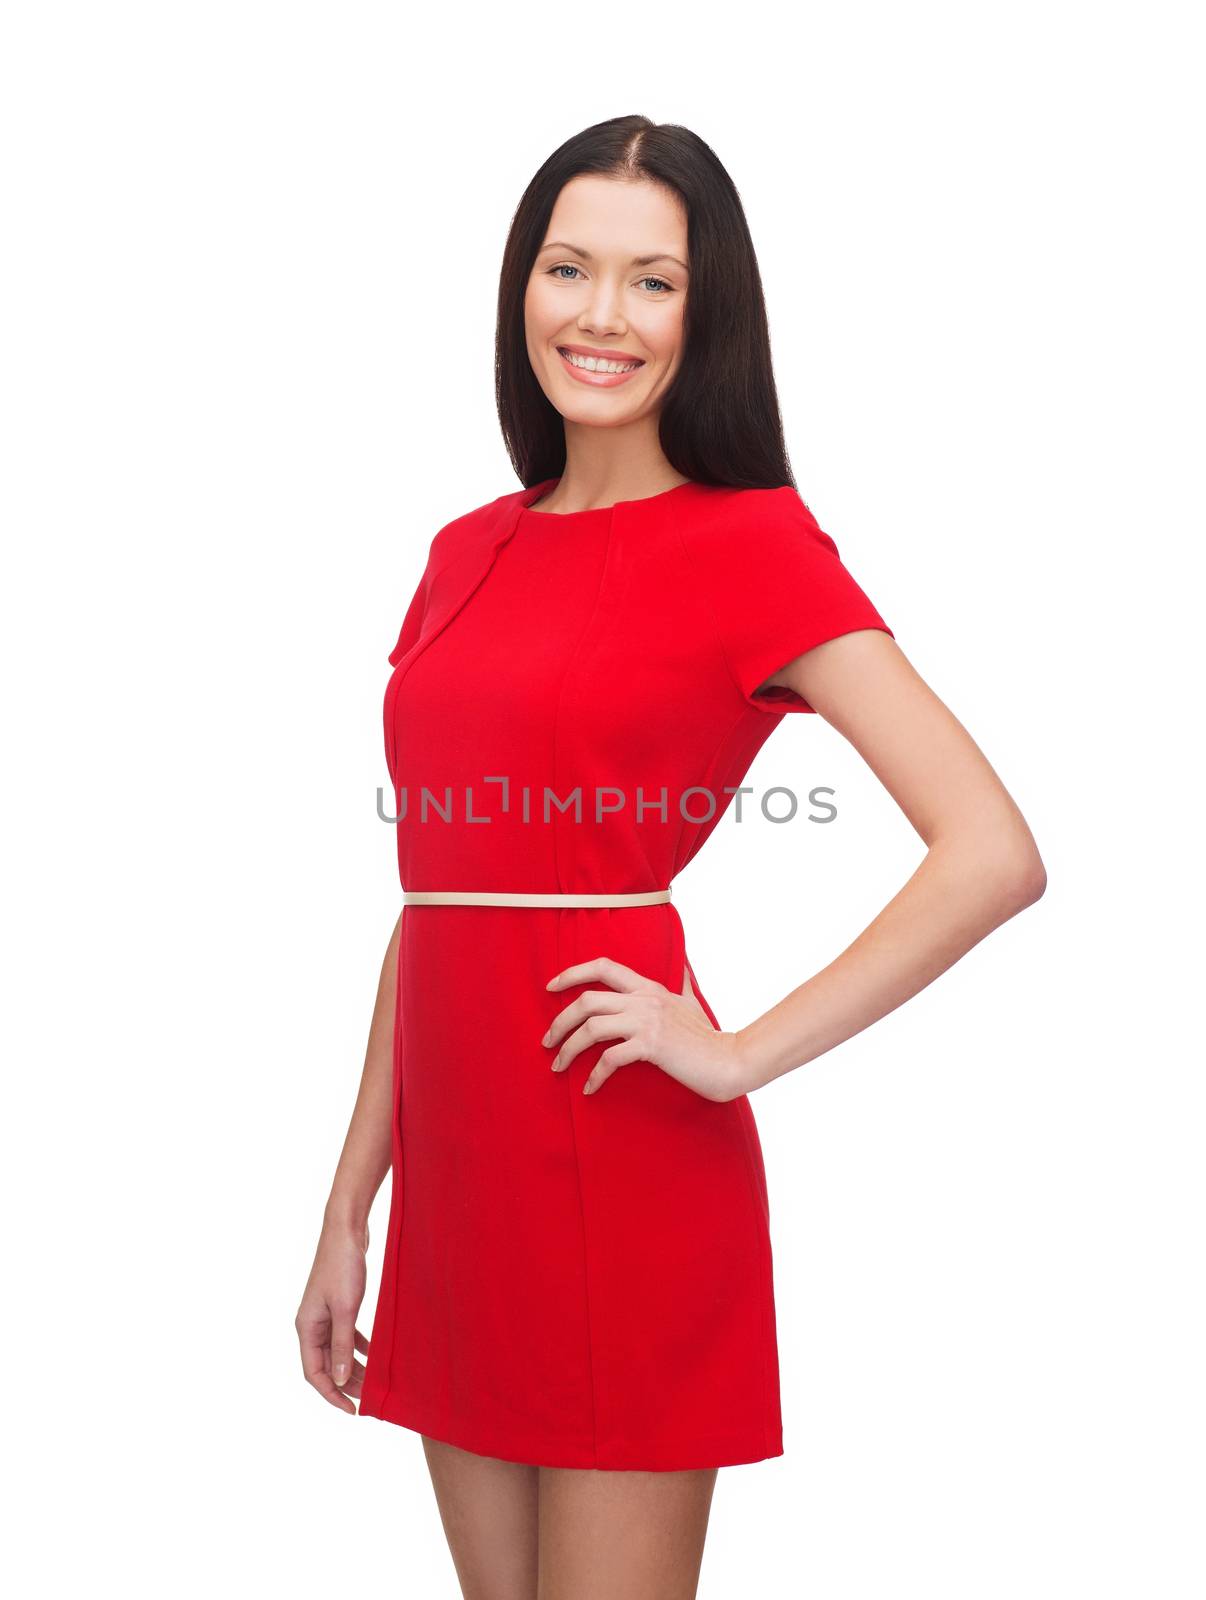 smiling young woman in red dress by dolgachov